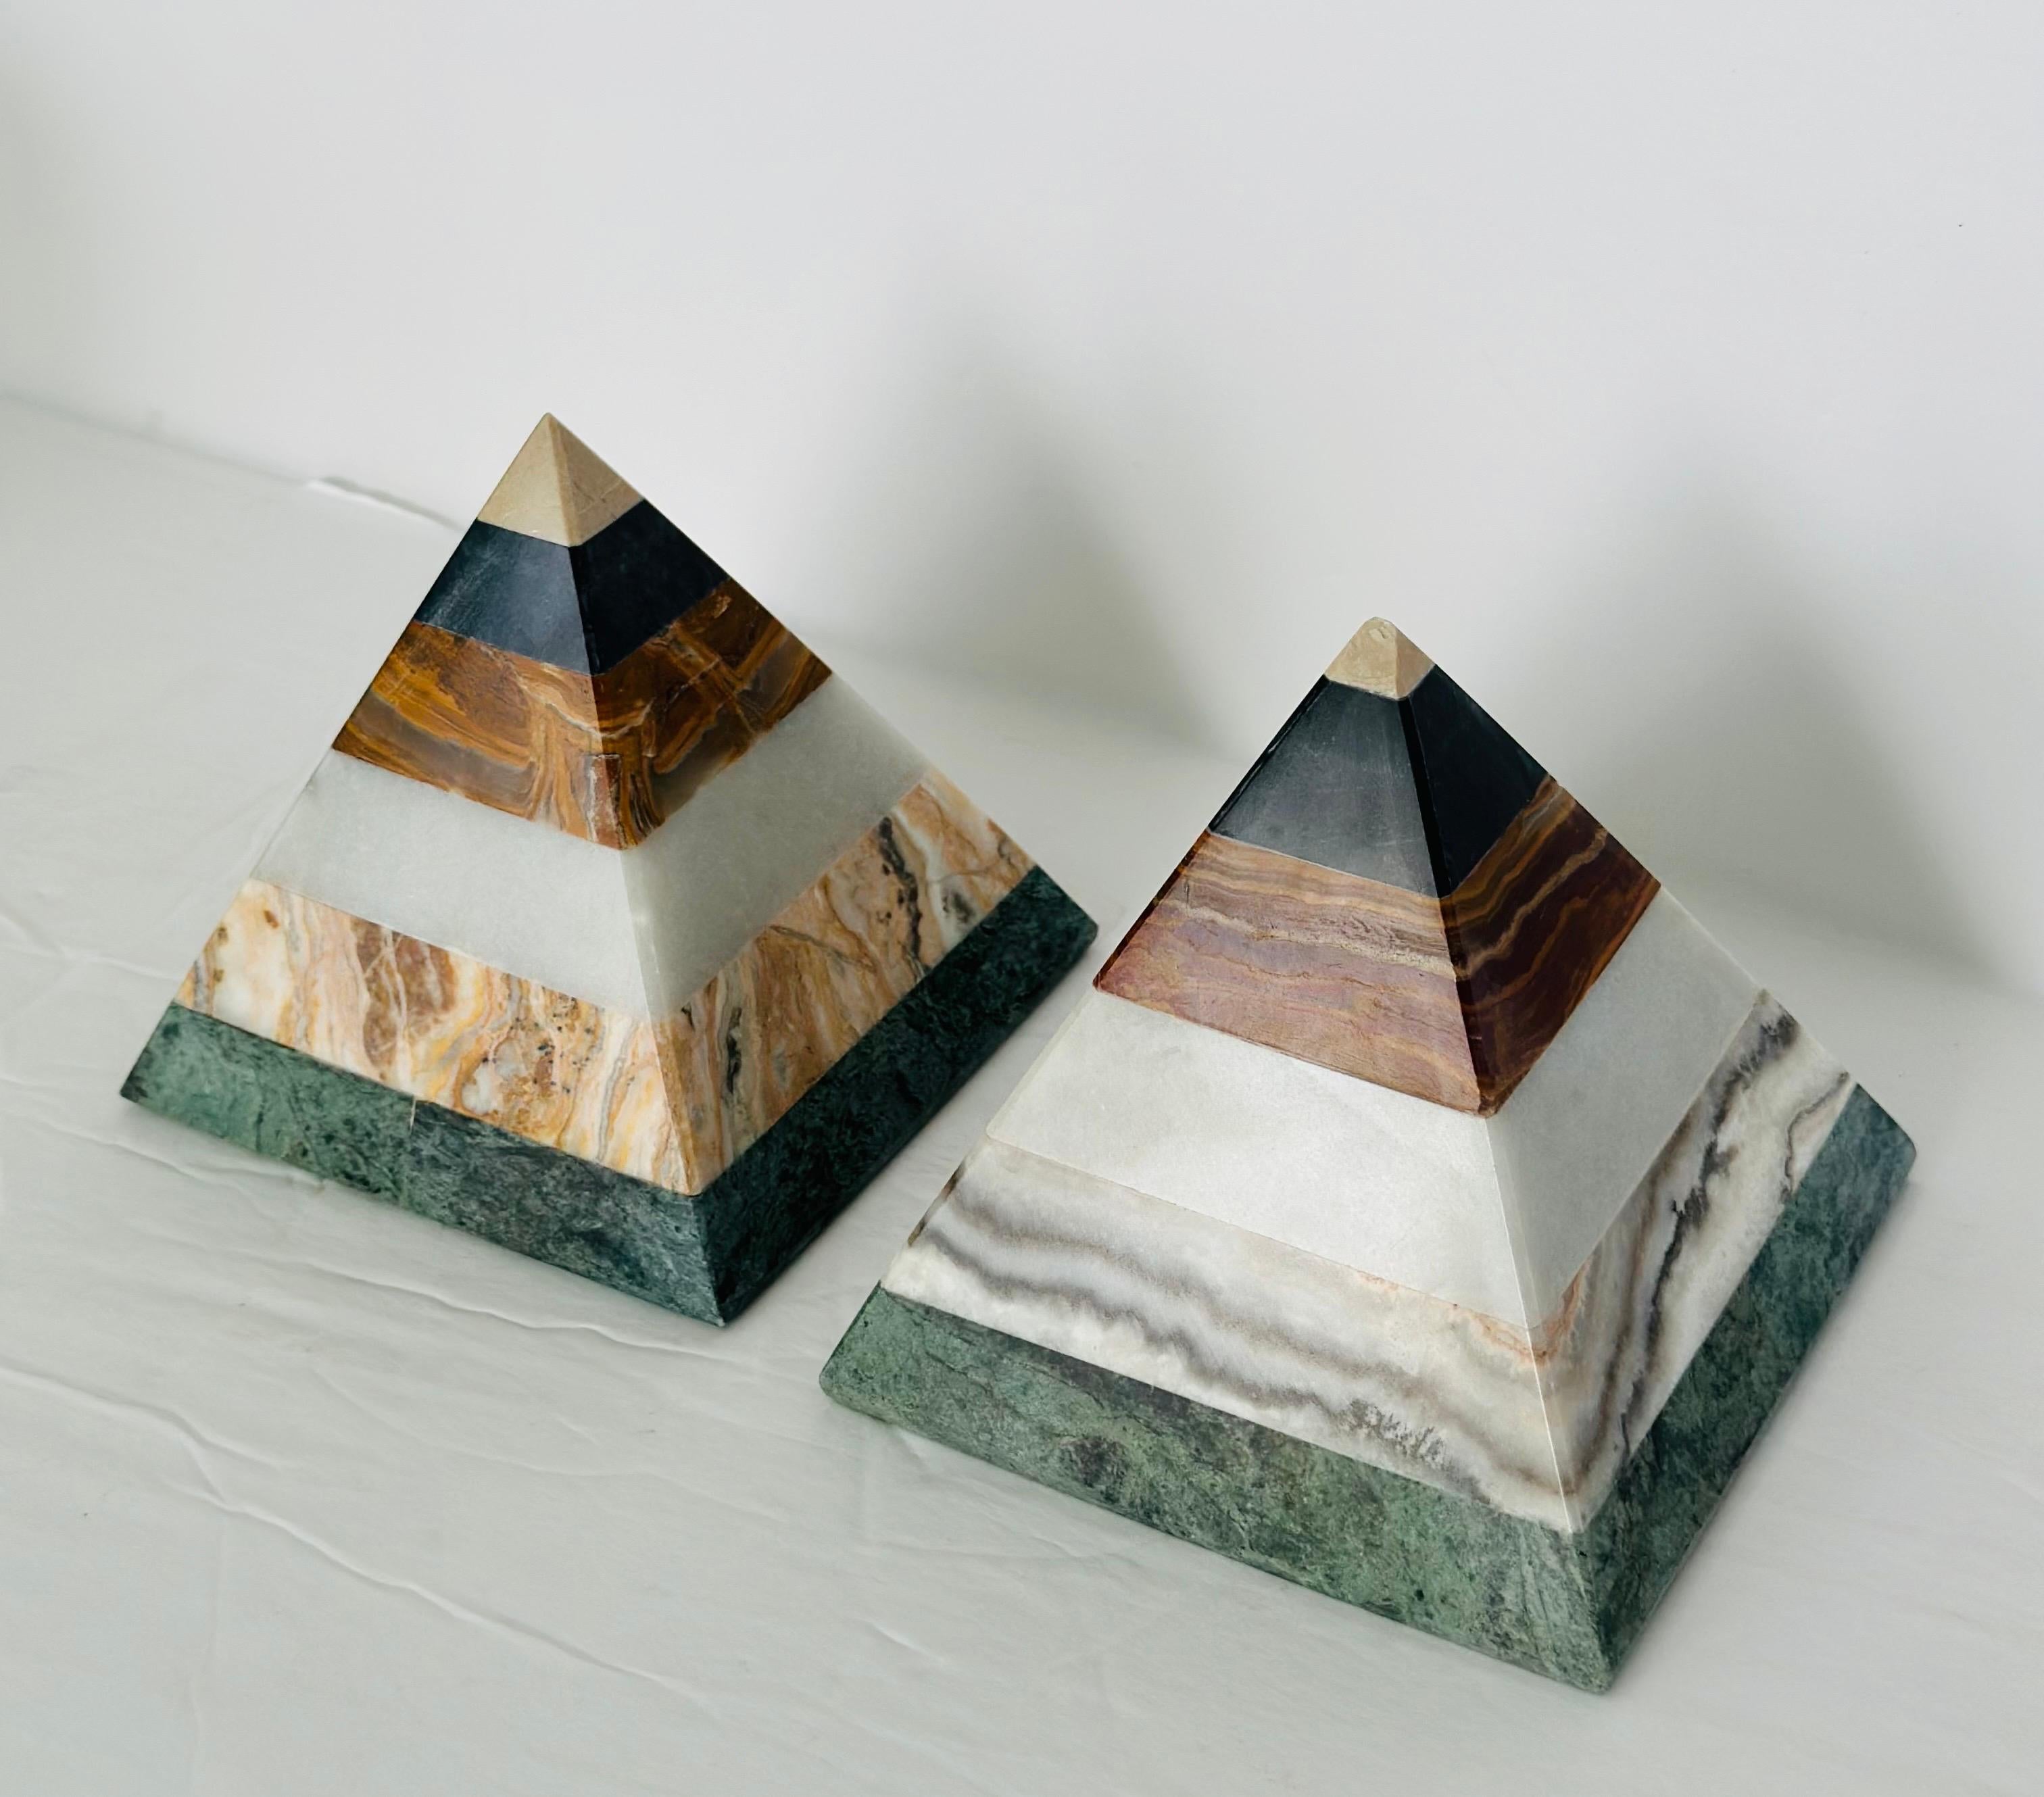 Italian Vintage Stacked Gemstone Sculptural Pyramids - a Pair For Sale